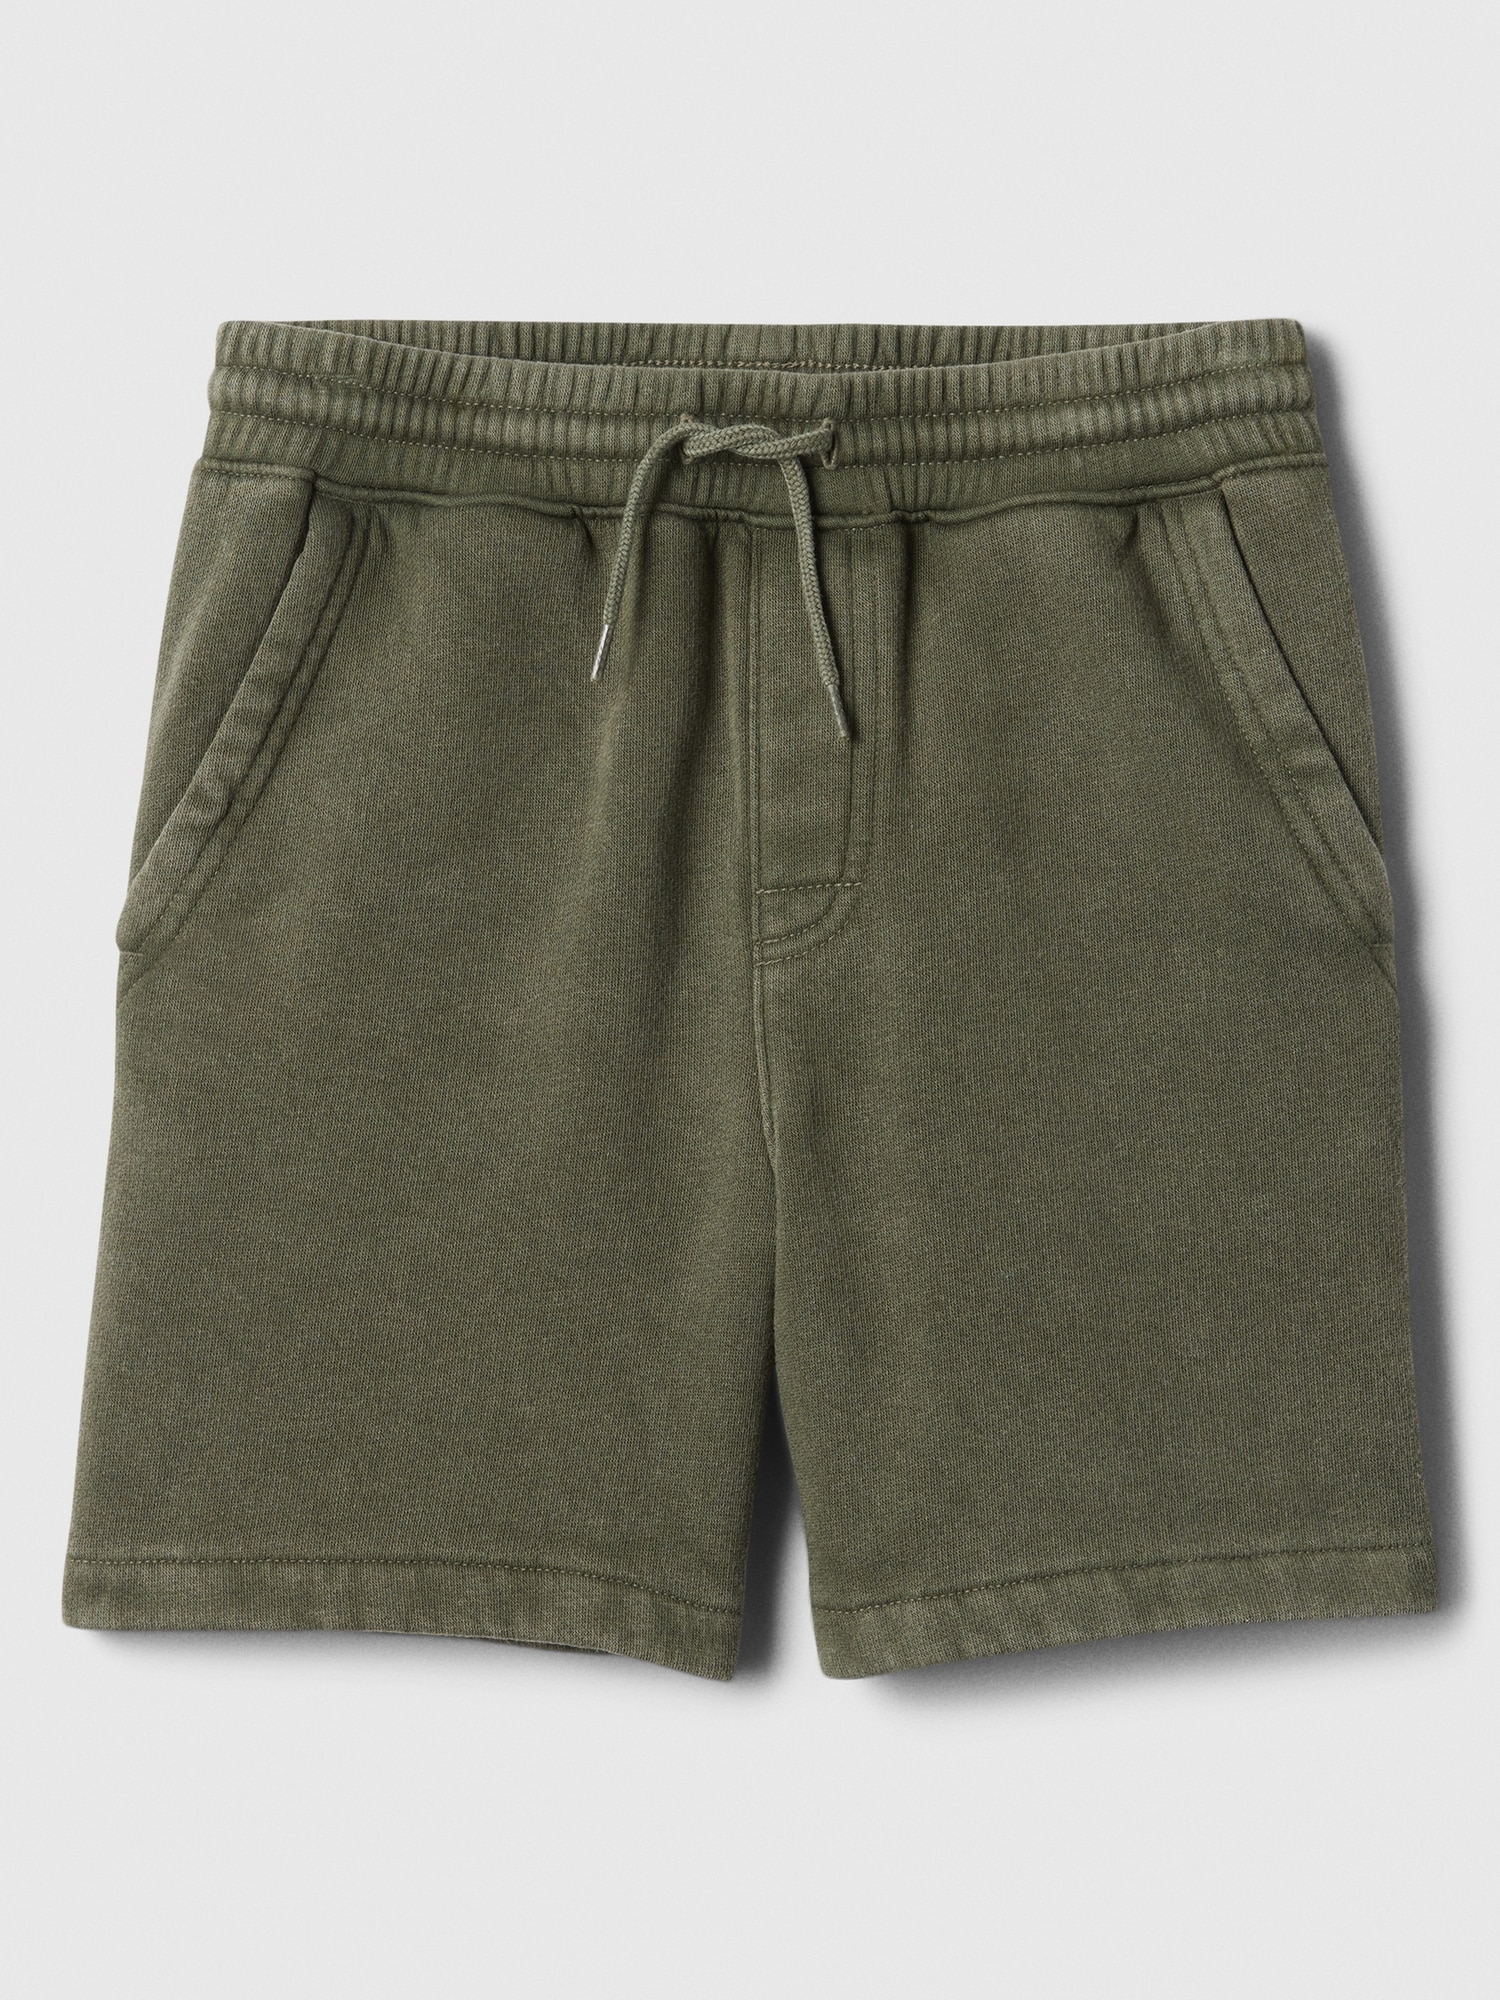 Kids Washed-Fleece Pull-On Shorts